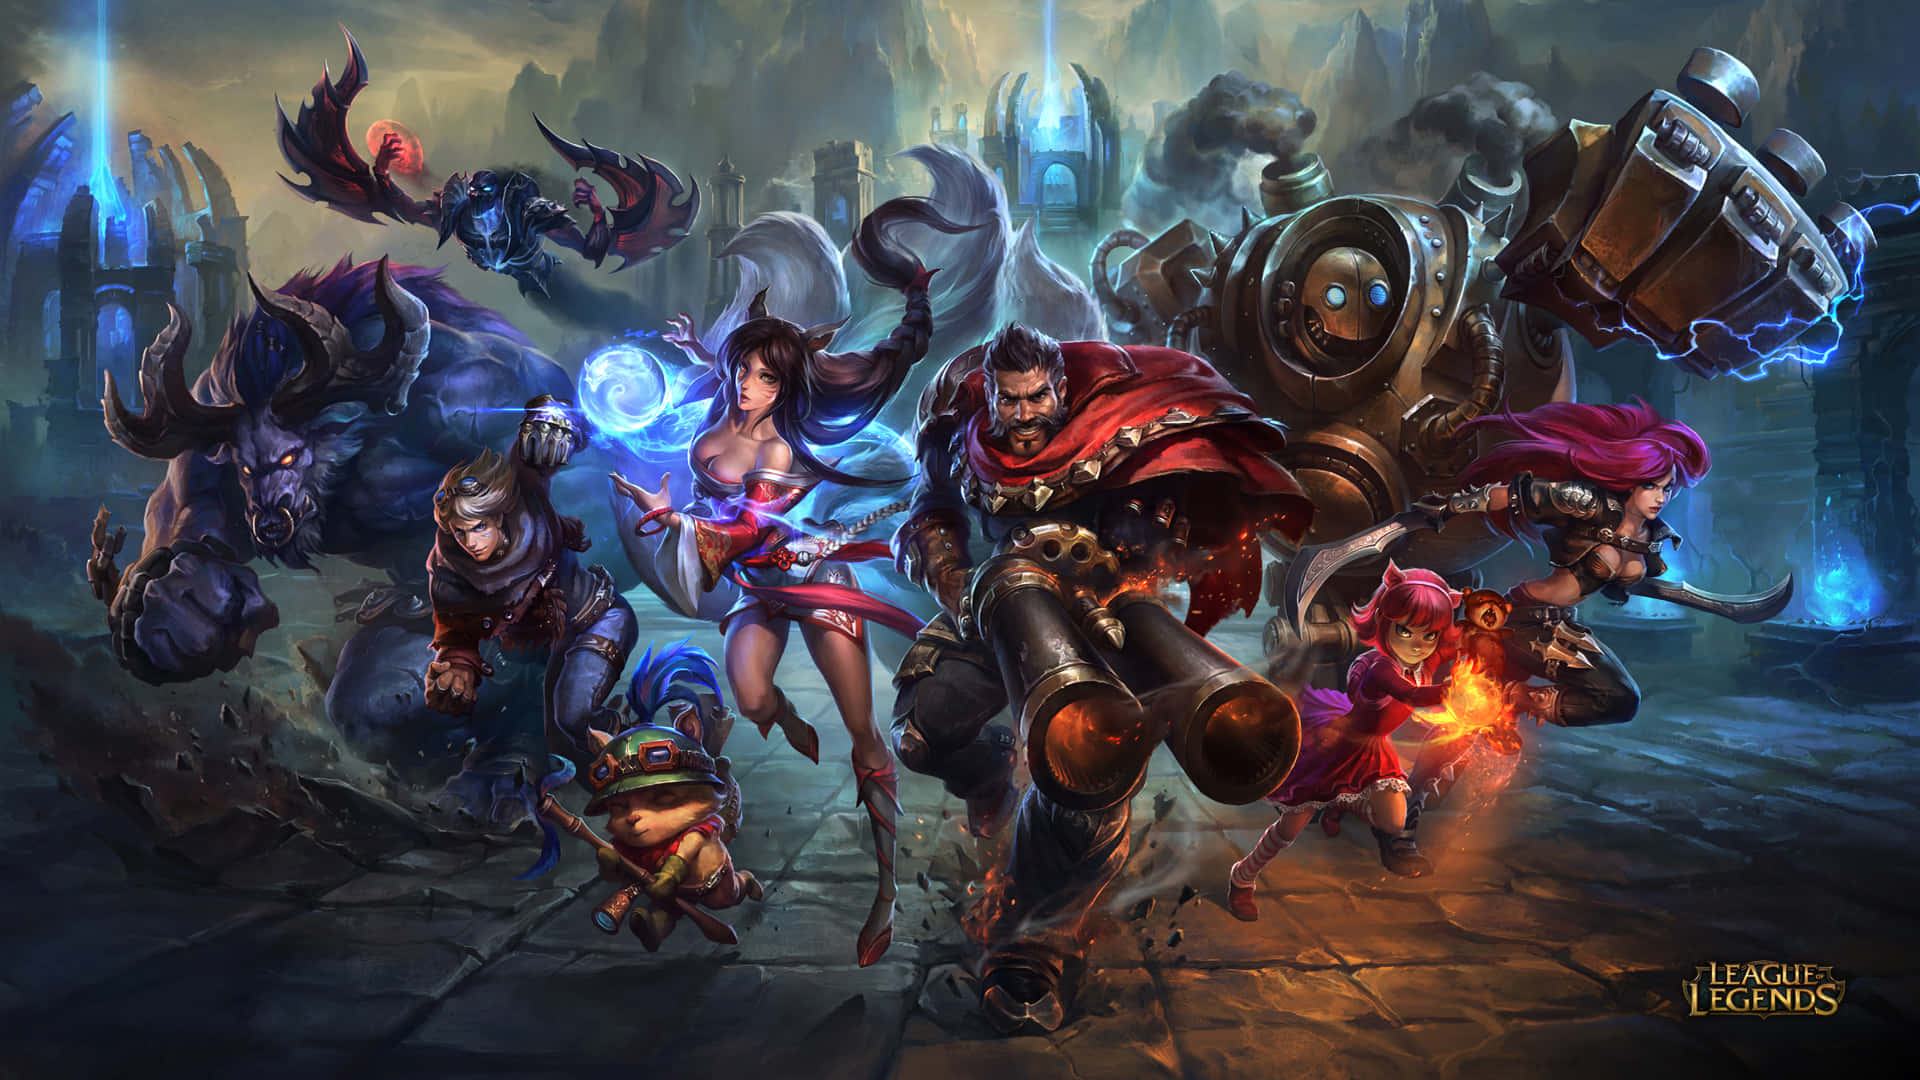 Level Up Your Gaming Experience with a League Of Legends Laptop Wallpaper